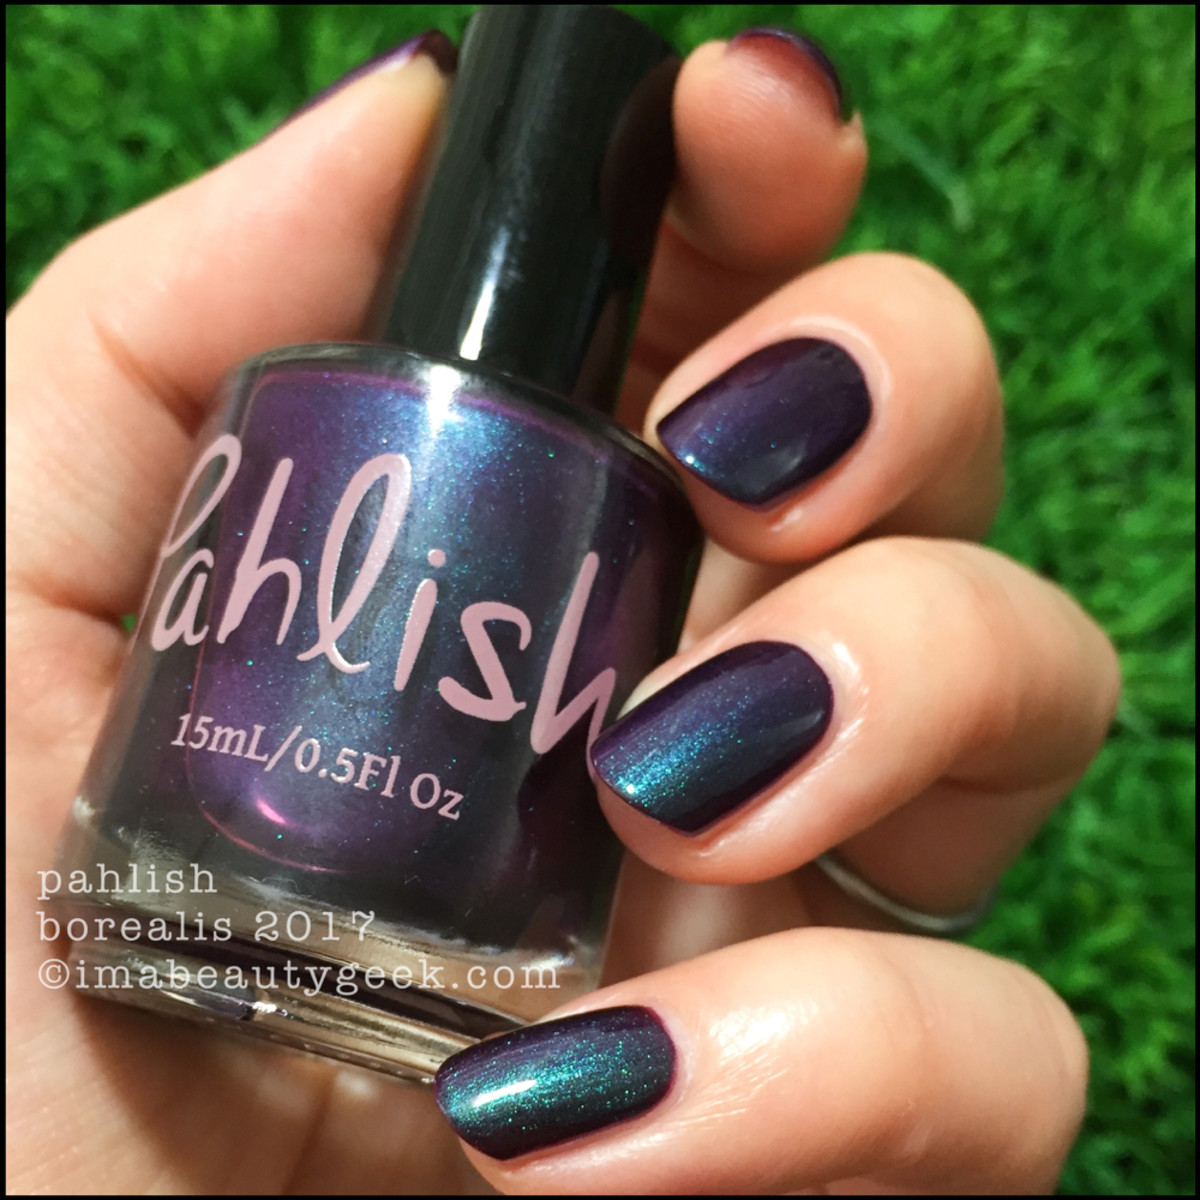 Pahlish Borealis Swatches August 2017 _ Pahlish August 2017 Swatches Review